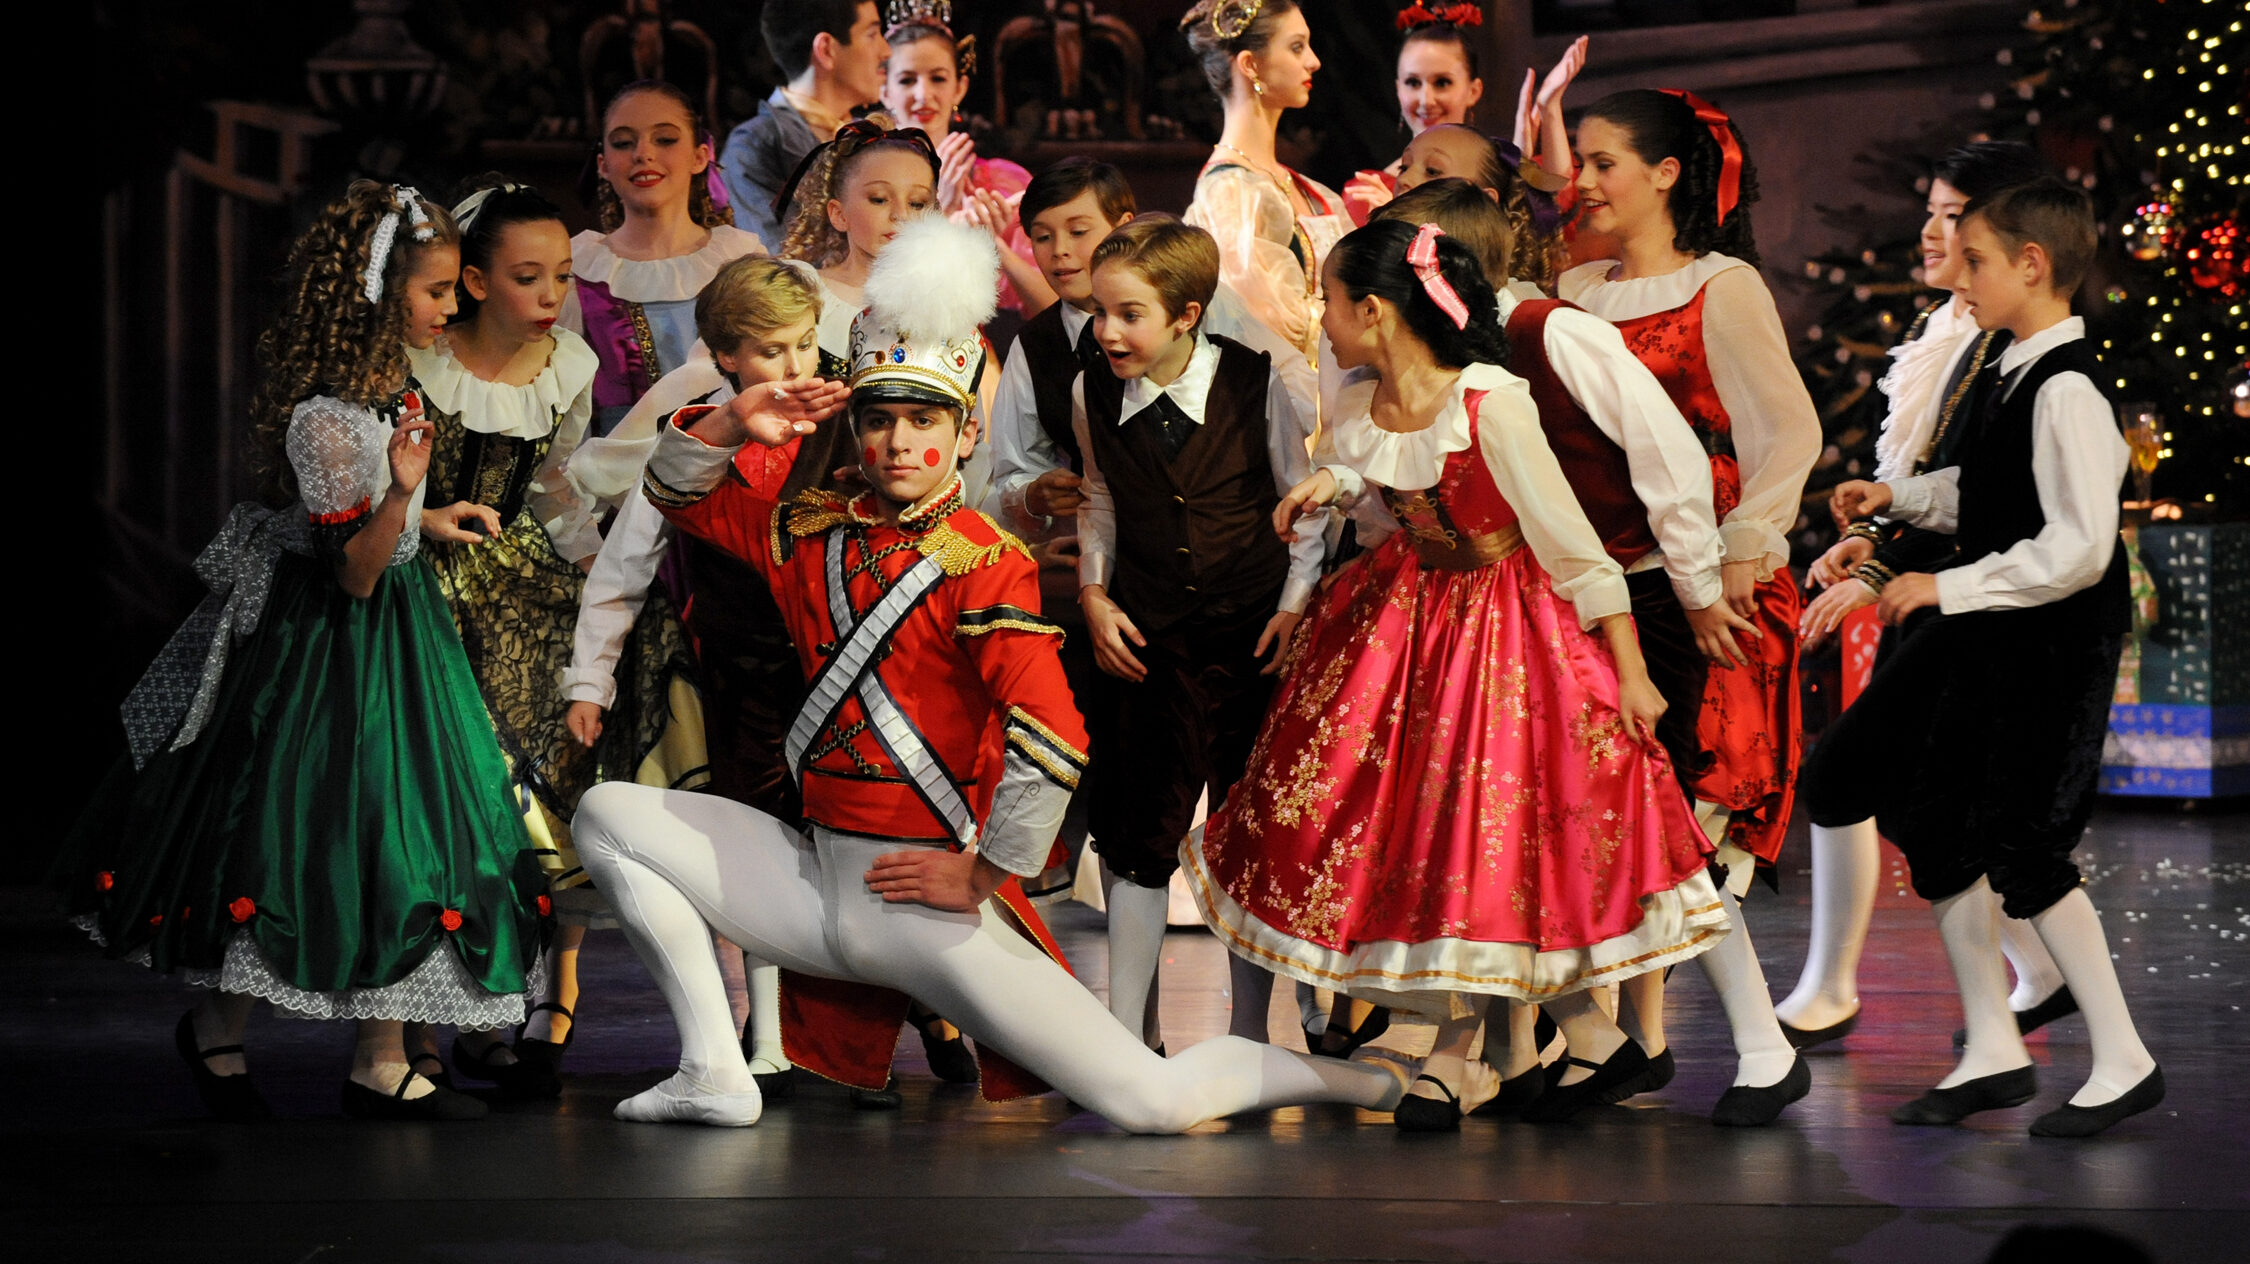 A group of children dancers in colorful, festive costumes performing a scene from "the nutcracker" ballet, with a young performer in a soldier costume sitting center stage surrounded by his peers.